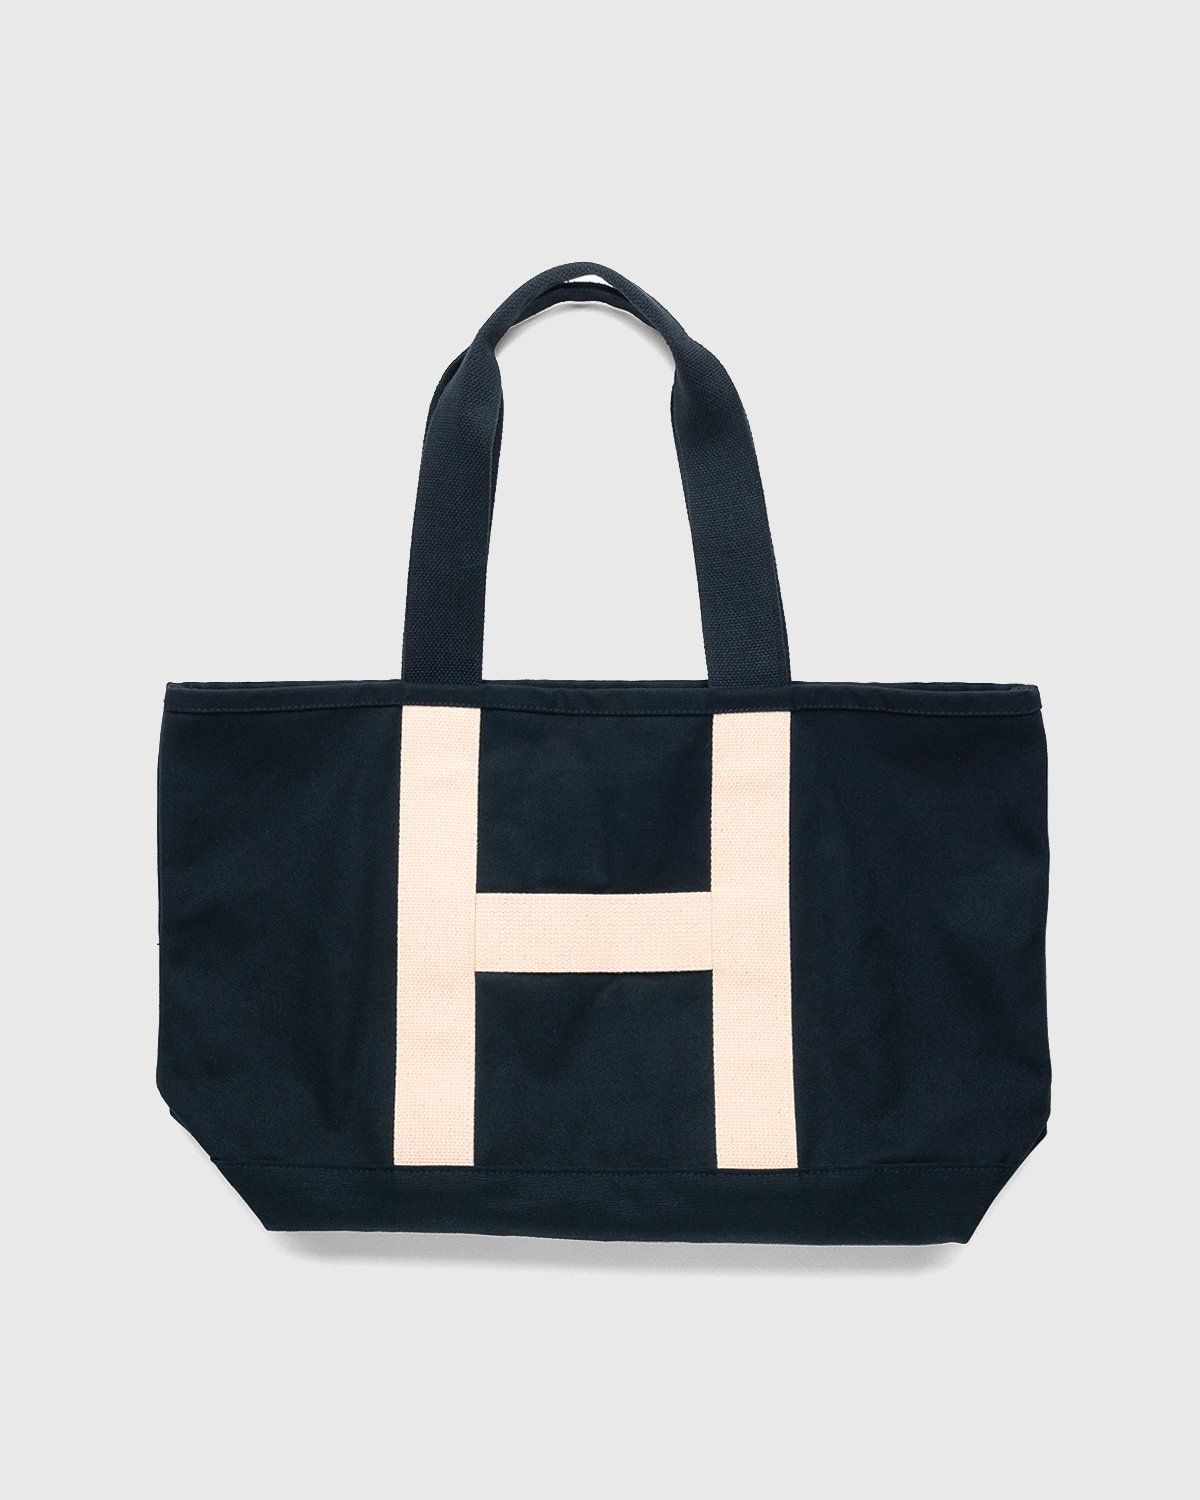 Highsnobiety – Heavy Canvas Large Shopper Tote Black - Tote Bags - Black - Image 1